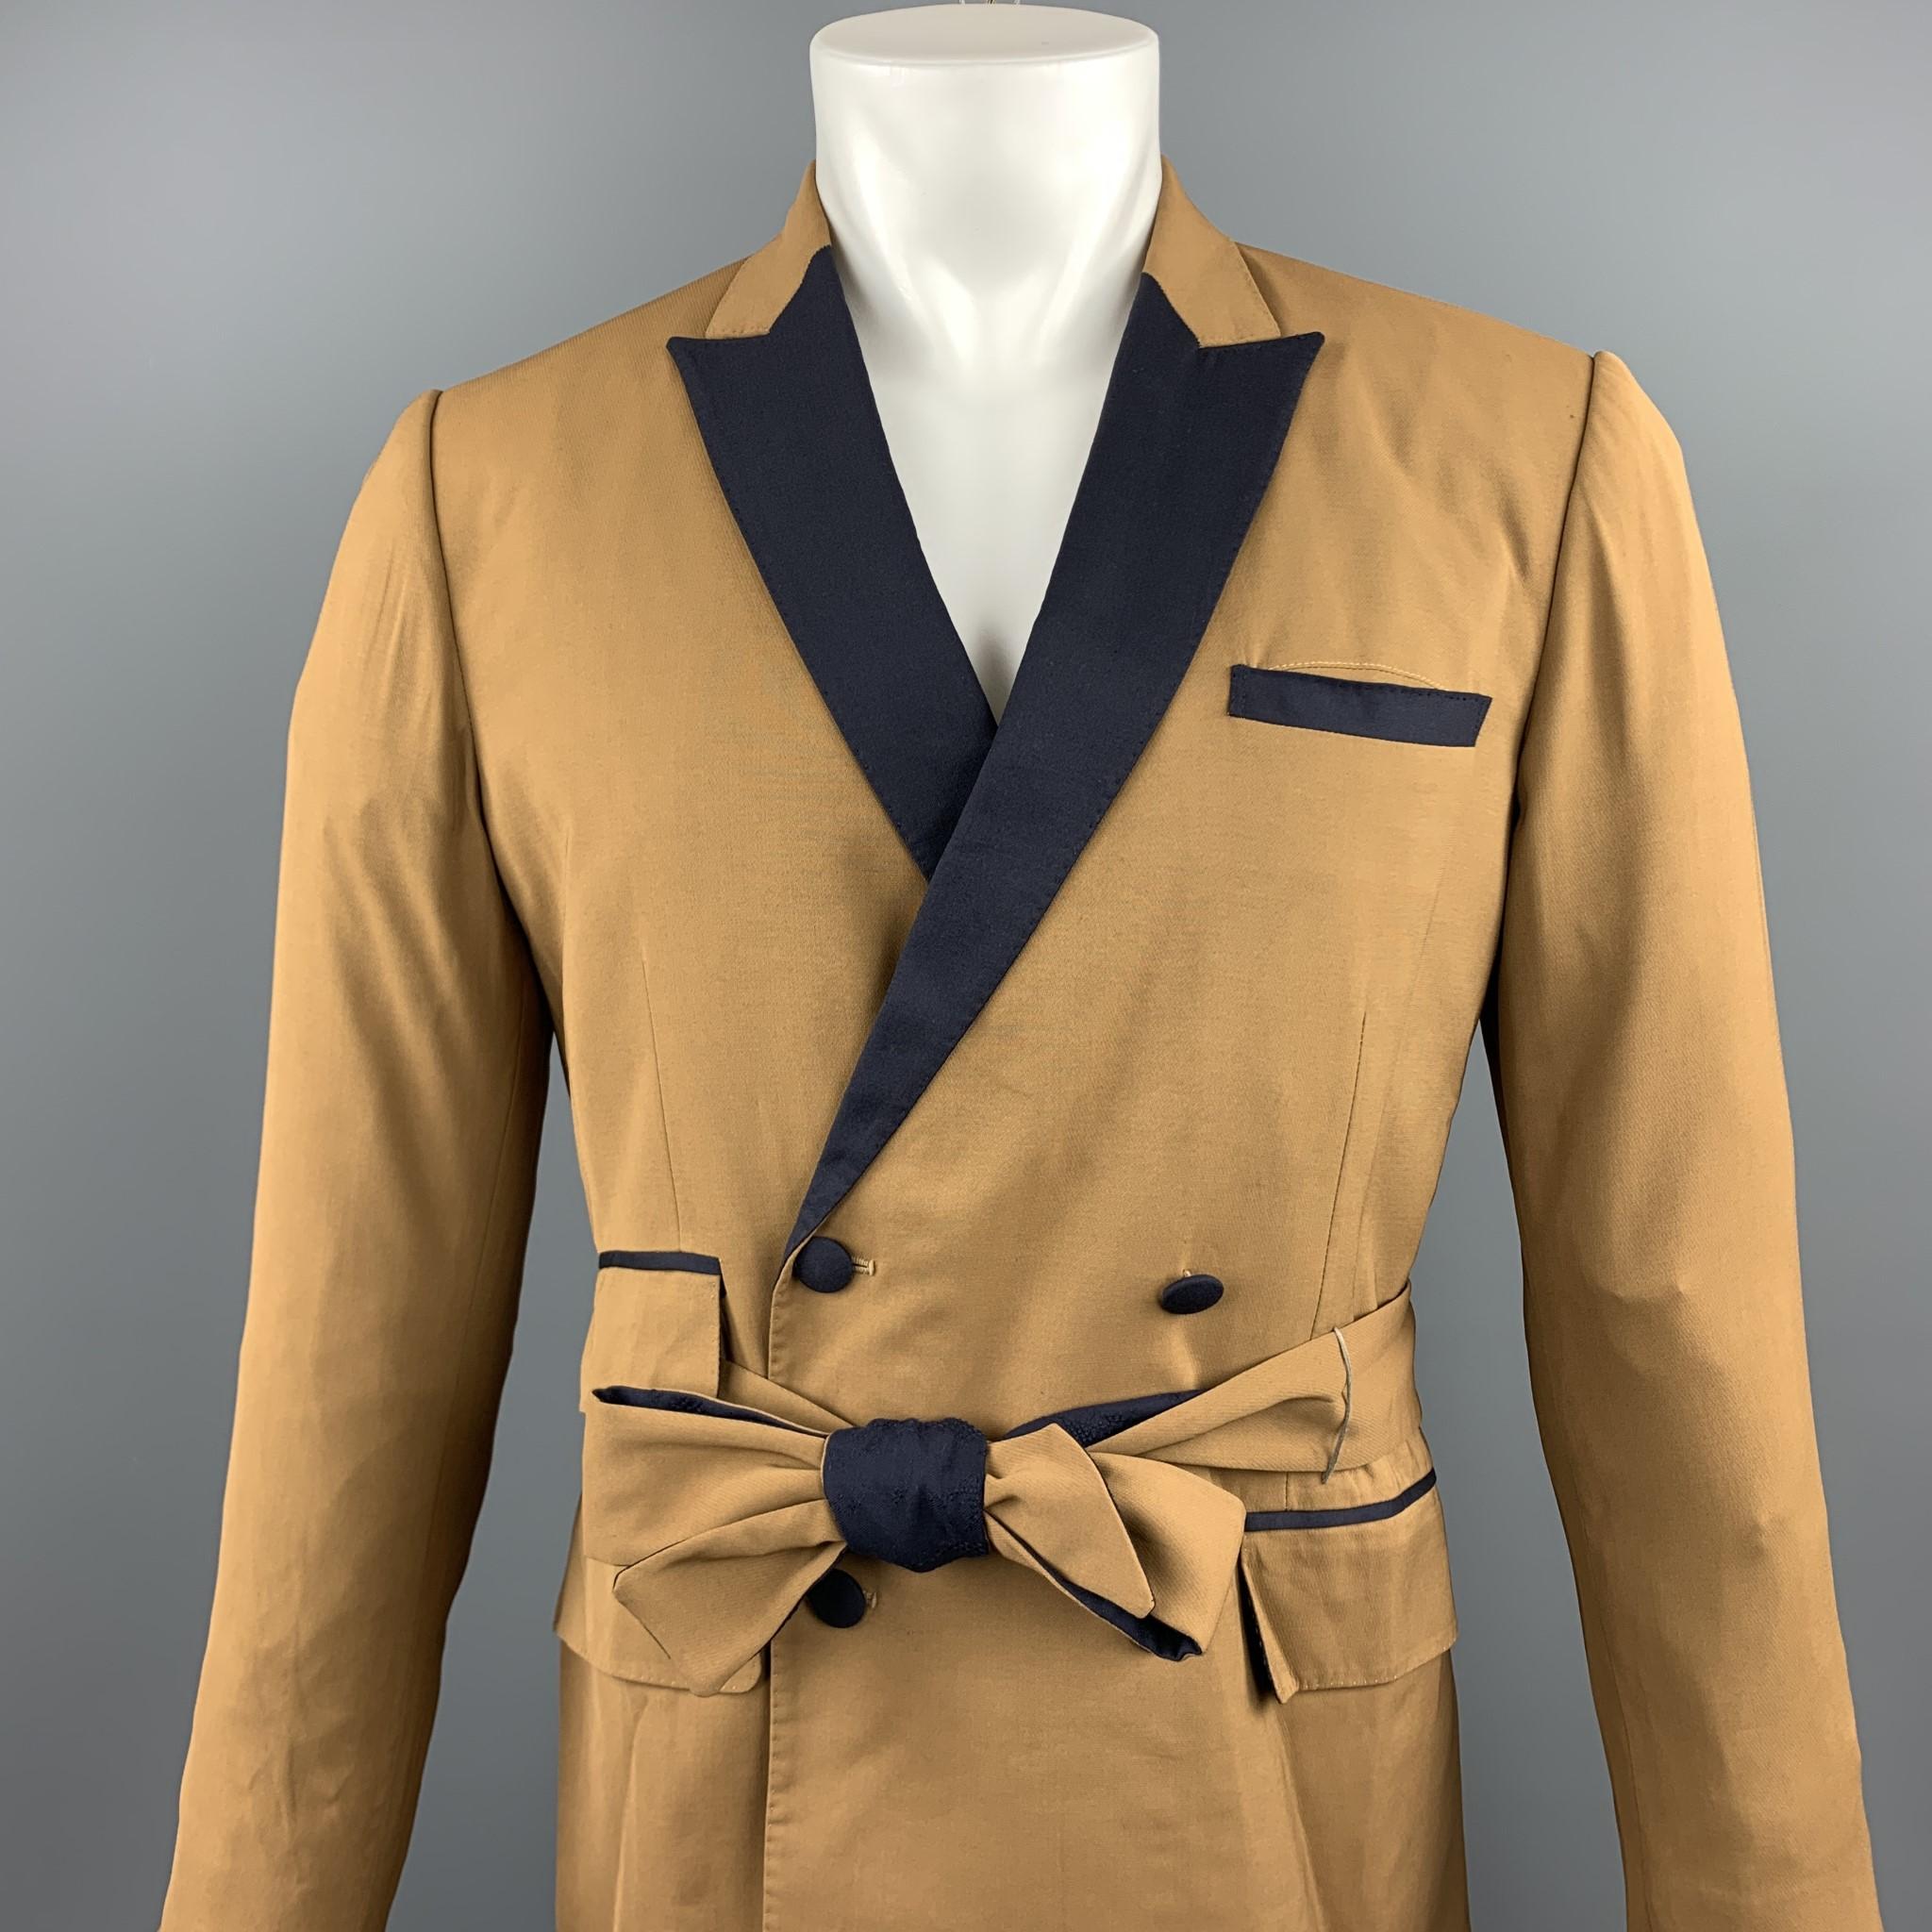 CARLOS CAMPOS sport coat comes in a tan & navy two toned wool featuring a peak lapel style, belted, flap pockets, and a double breasted closure.

Excellent Pre-Owned Condition.
Marked: No Size Marked

Measurements:

Shoulder: 16 in. 
Chest: 38 in.